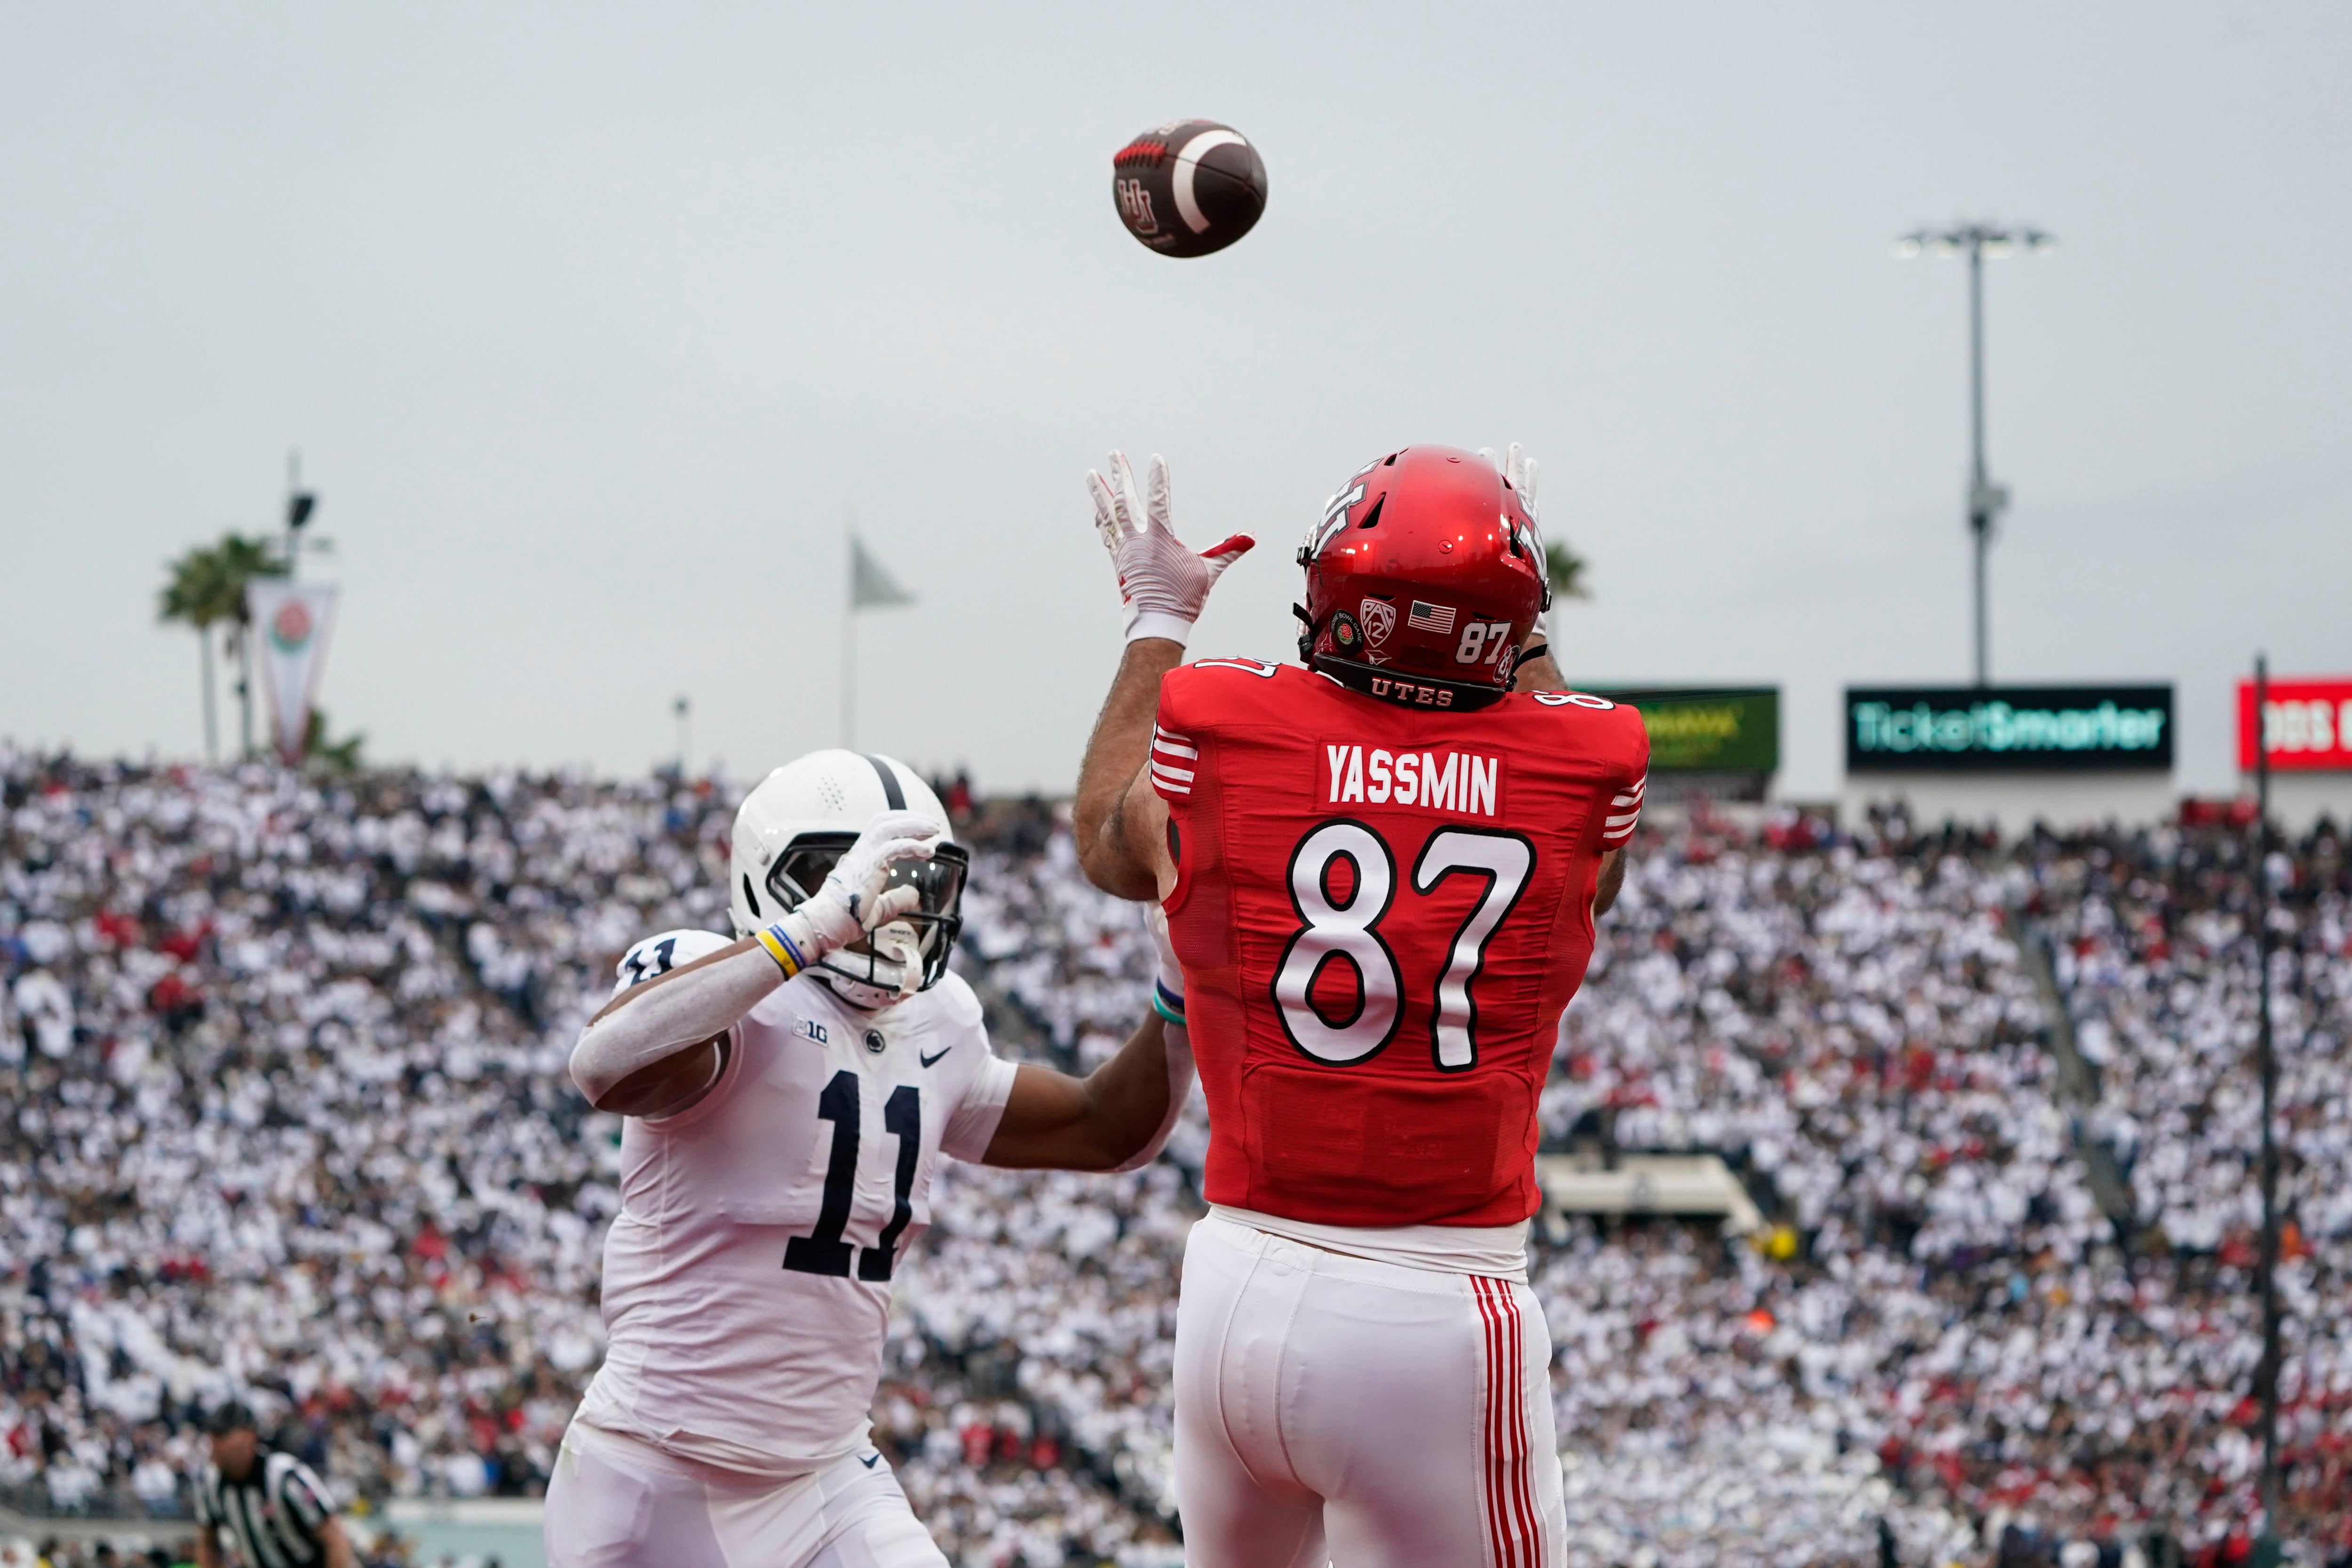 (Marcio Jose Sanchez | AP) Utah tight end Thomas Yassmin (87) catches a touchdown pass against Penn State linebacker Abdul Carter (11) during the first half in the Rose Bowl NCAA college football game Monday, Jan. 2, 2023, in Pasadena, Calif.